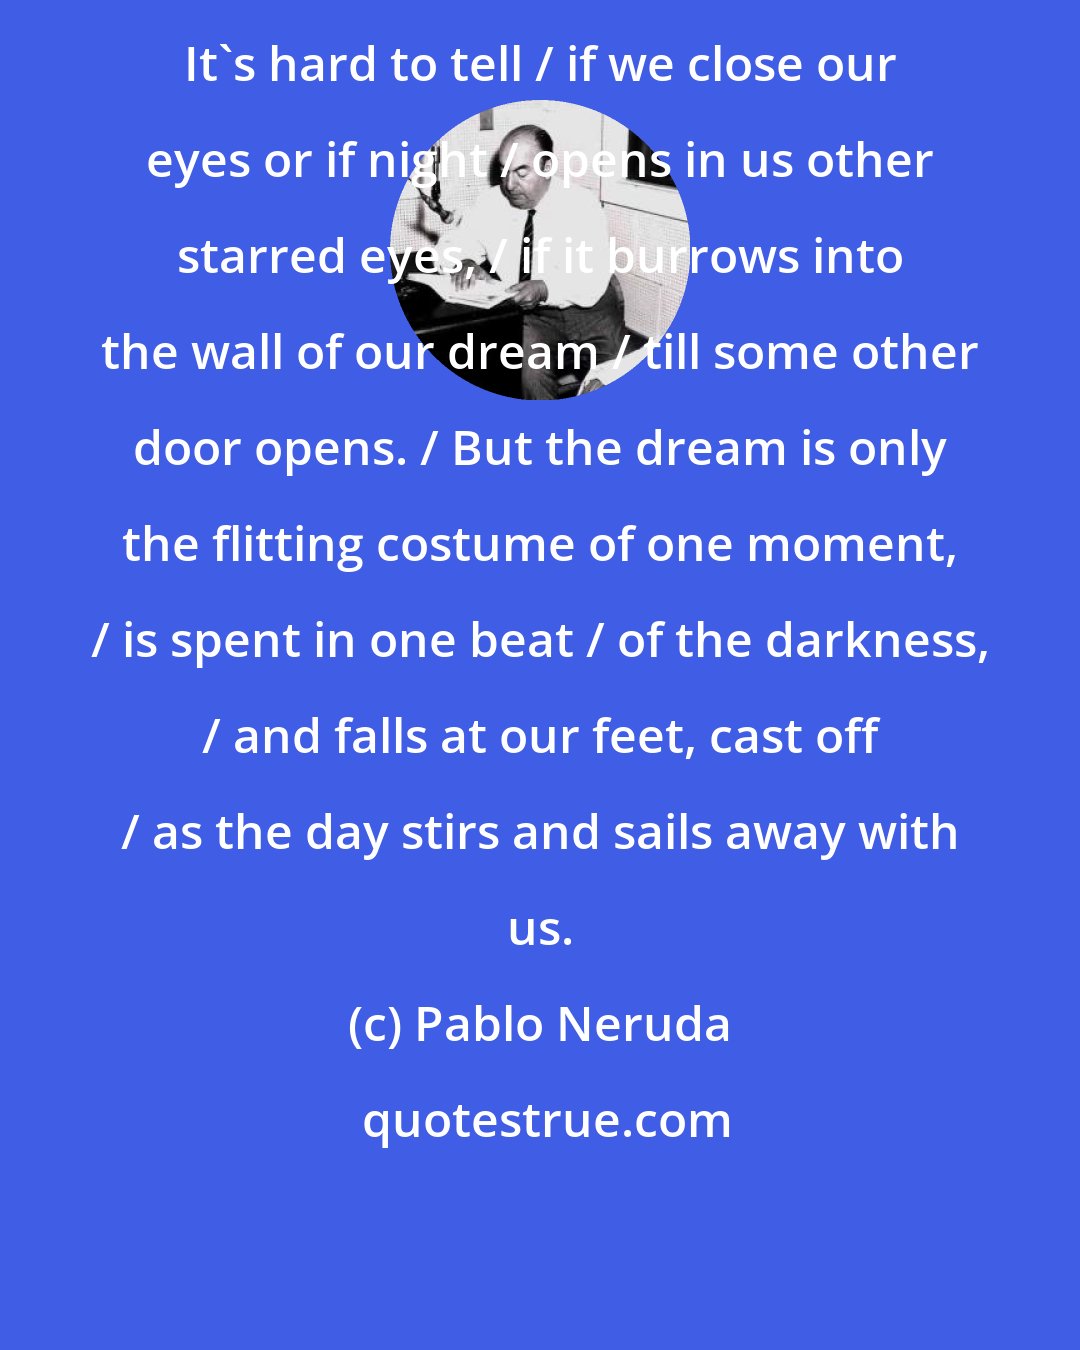 Pablo Neruda: It's hard to tell / if we close our eyes or if night / opens in us other starred eyes, / if it burrows into the wall of our dream / till some other door opens. / But the dream is only the flitting costume of one moment, / is spent in one beat / of the darkness, / and falls at our feet, cast off / as the day stirs and sails away with us.